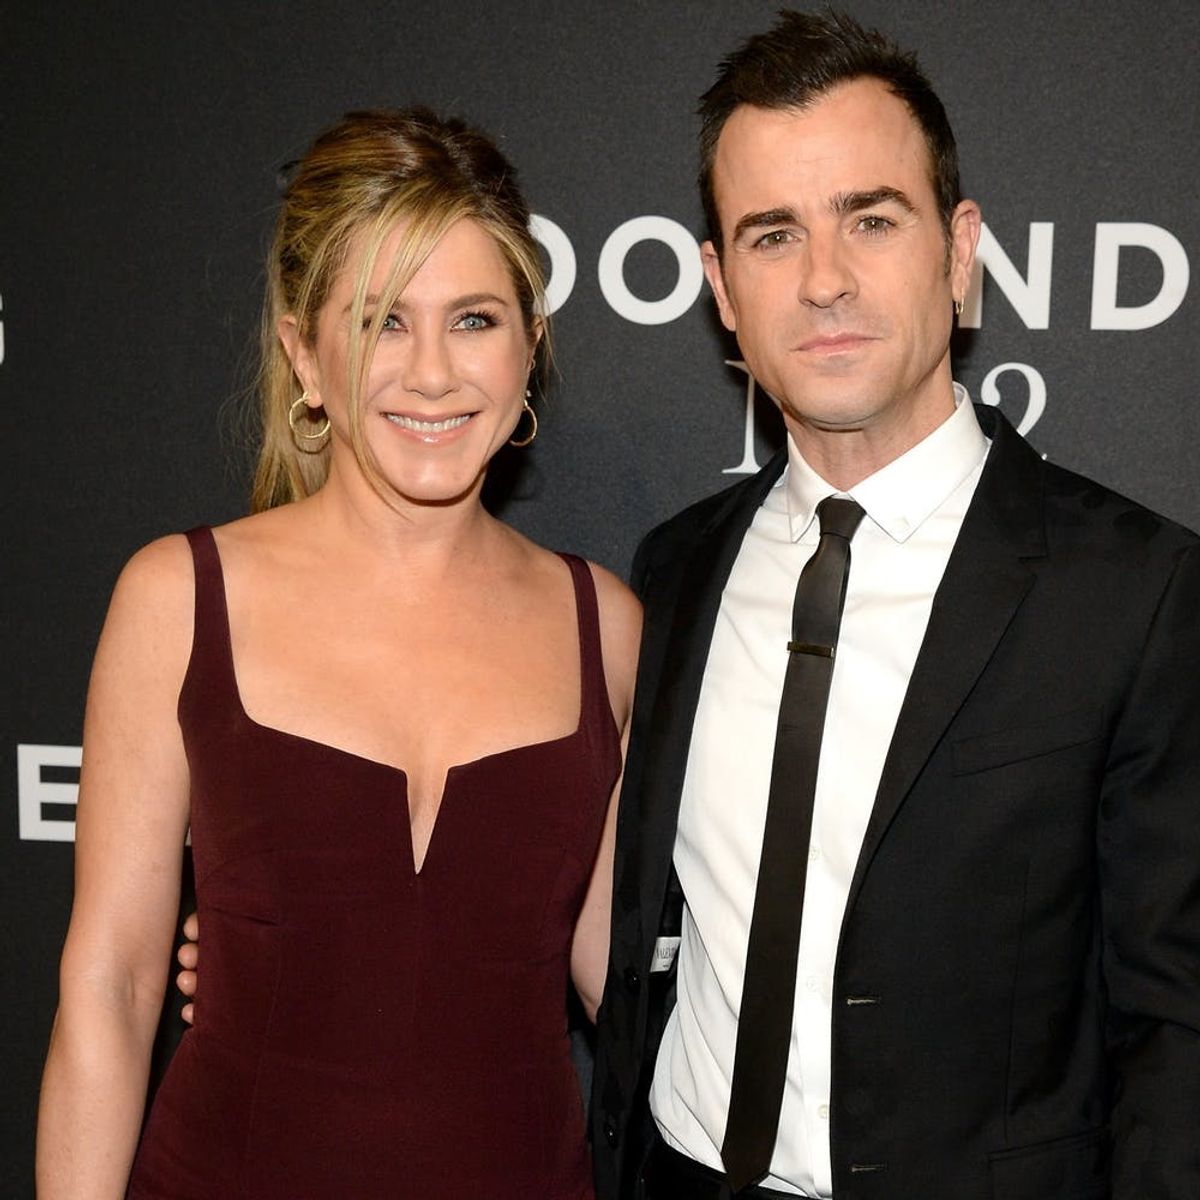 Justin Theroux Just Gifted Us With a Super Rare Selfie in Honor of Jennifer Aniston’s Birthday